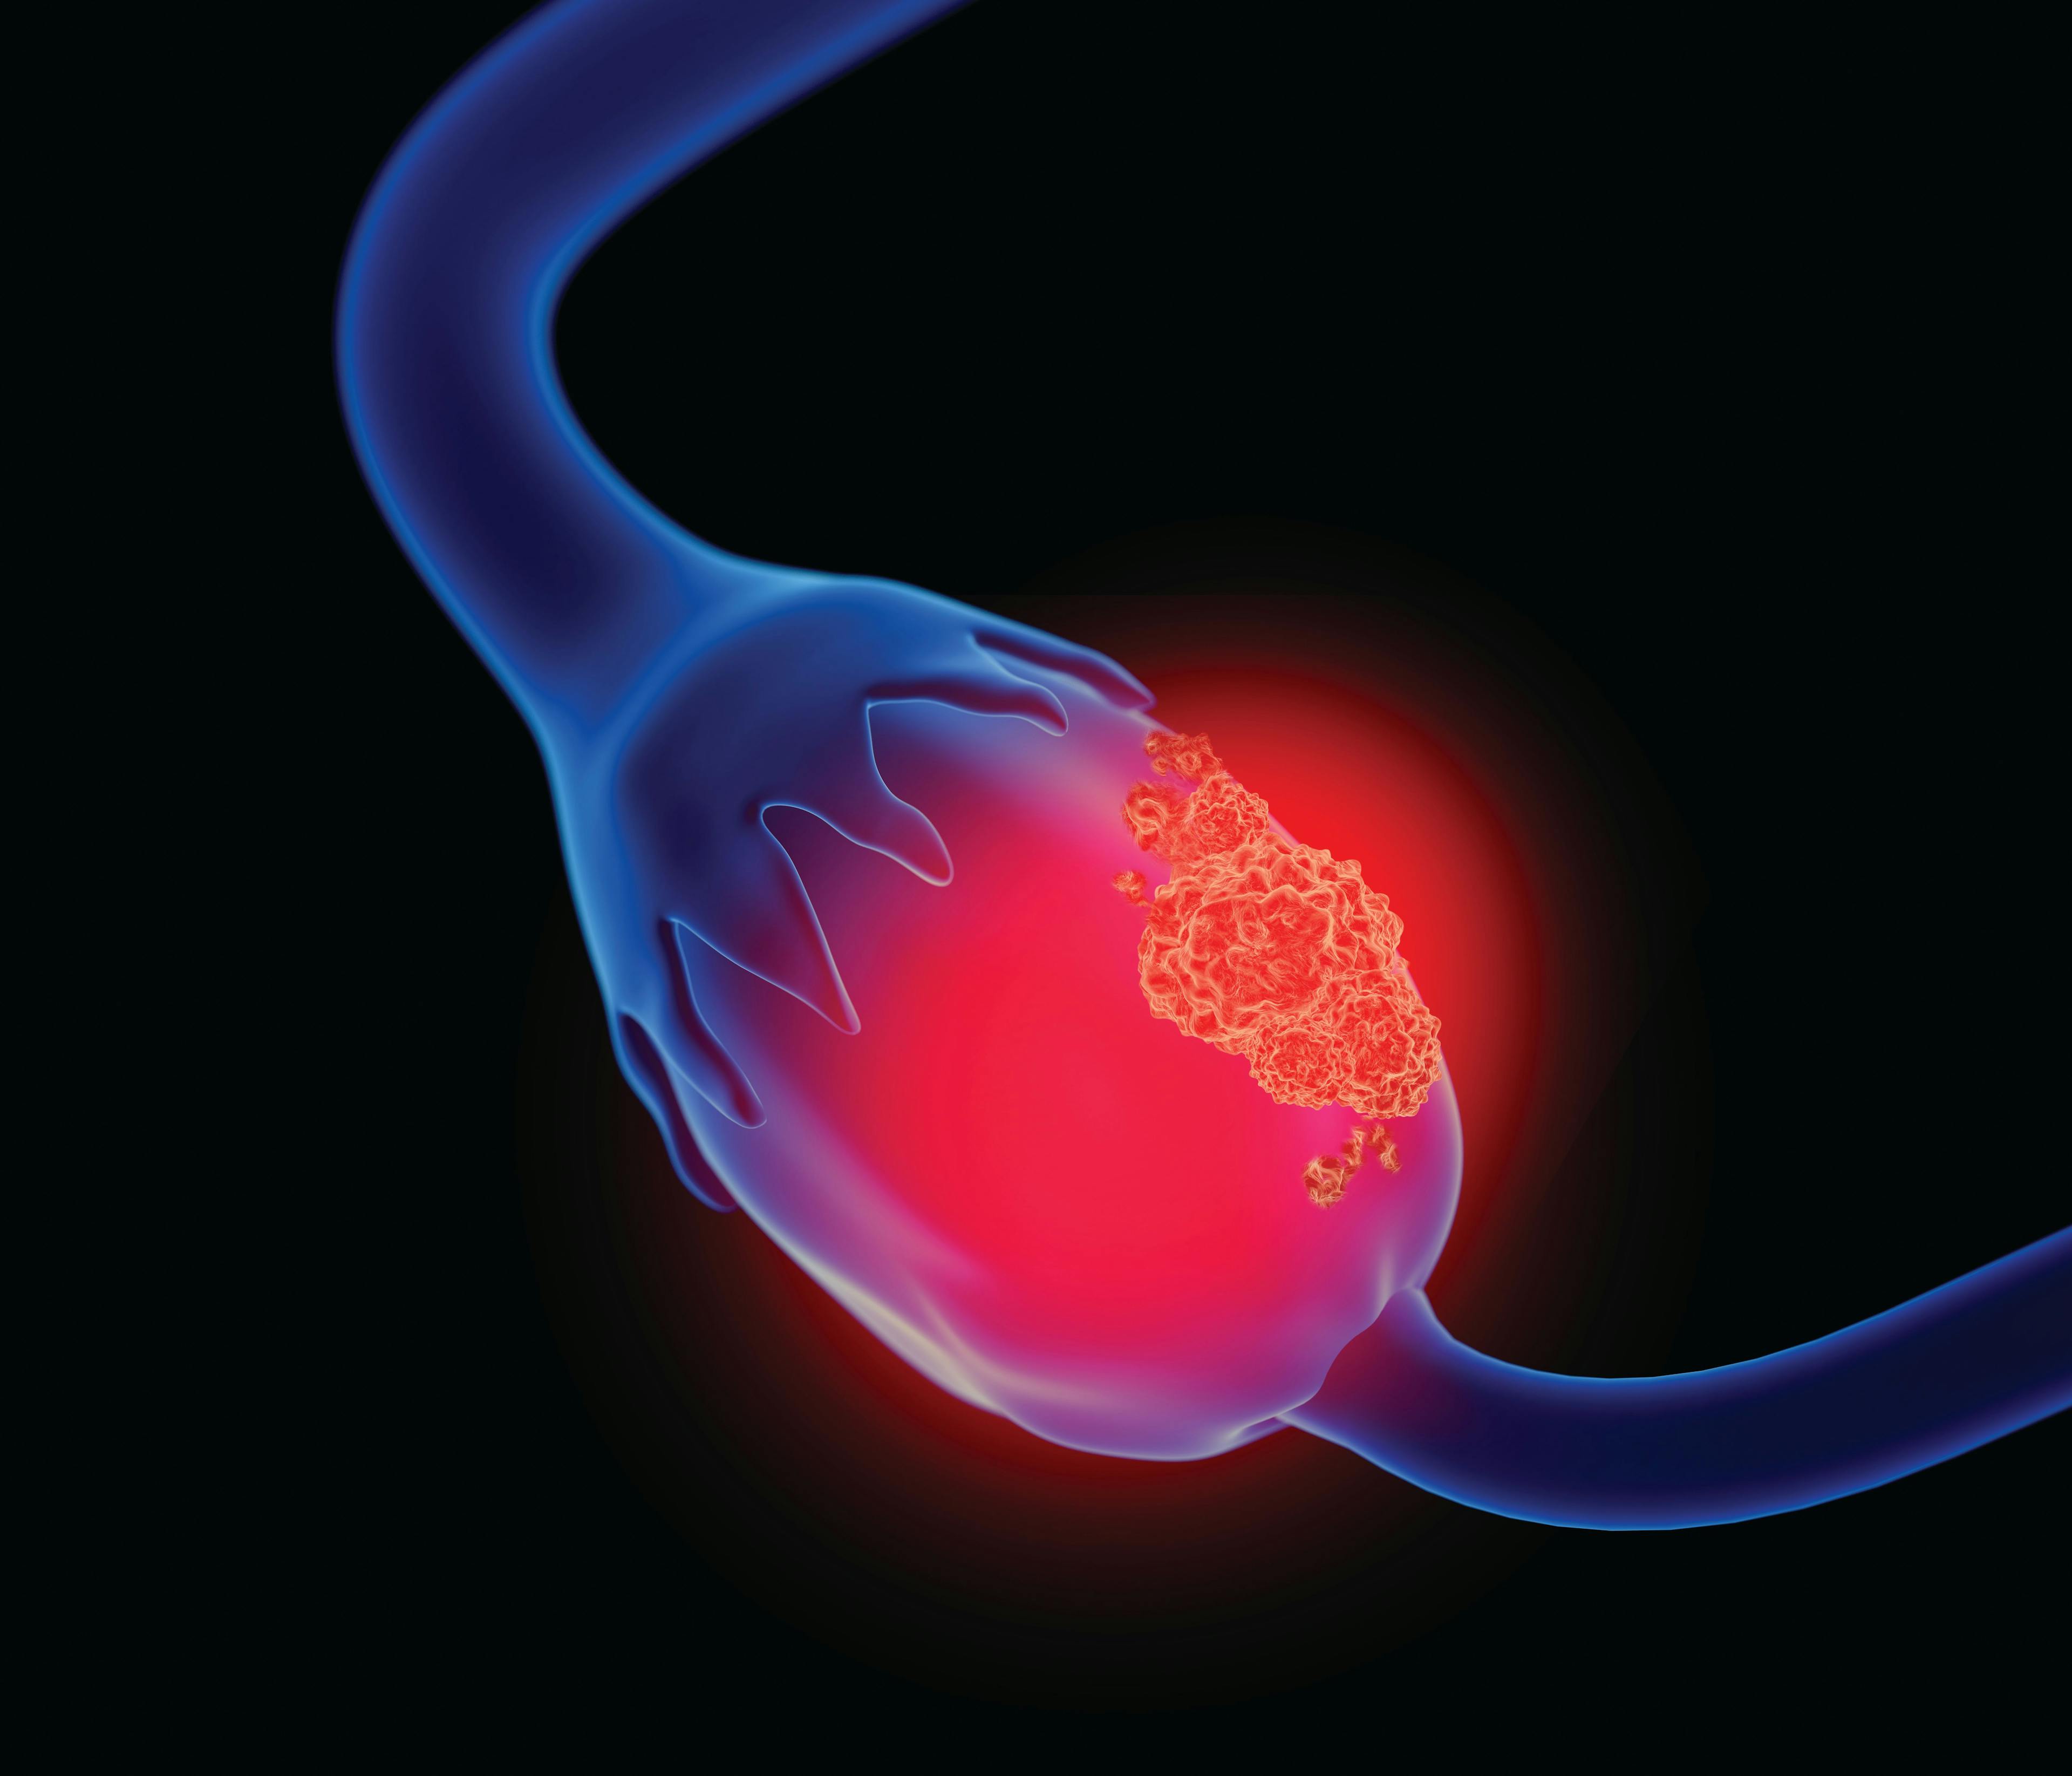 Novel Assay Helps Identify Appropriate Monitoring, Immunotherapy for Patients With Ovarian Cancer